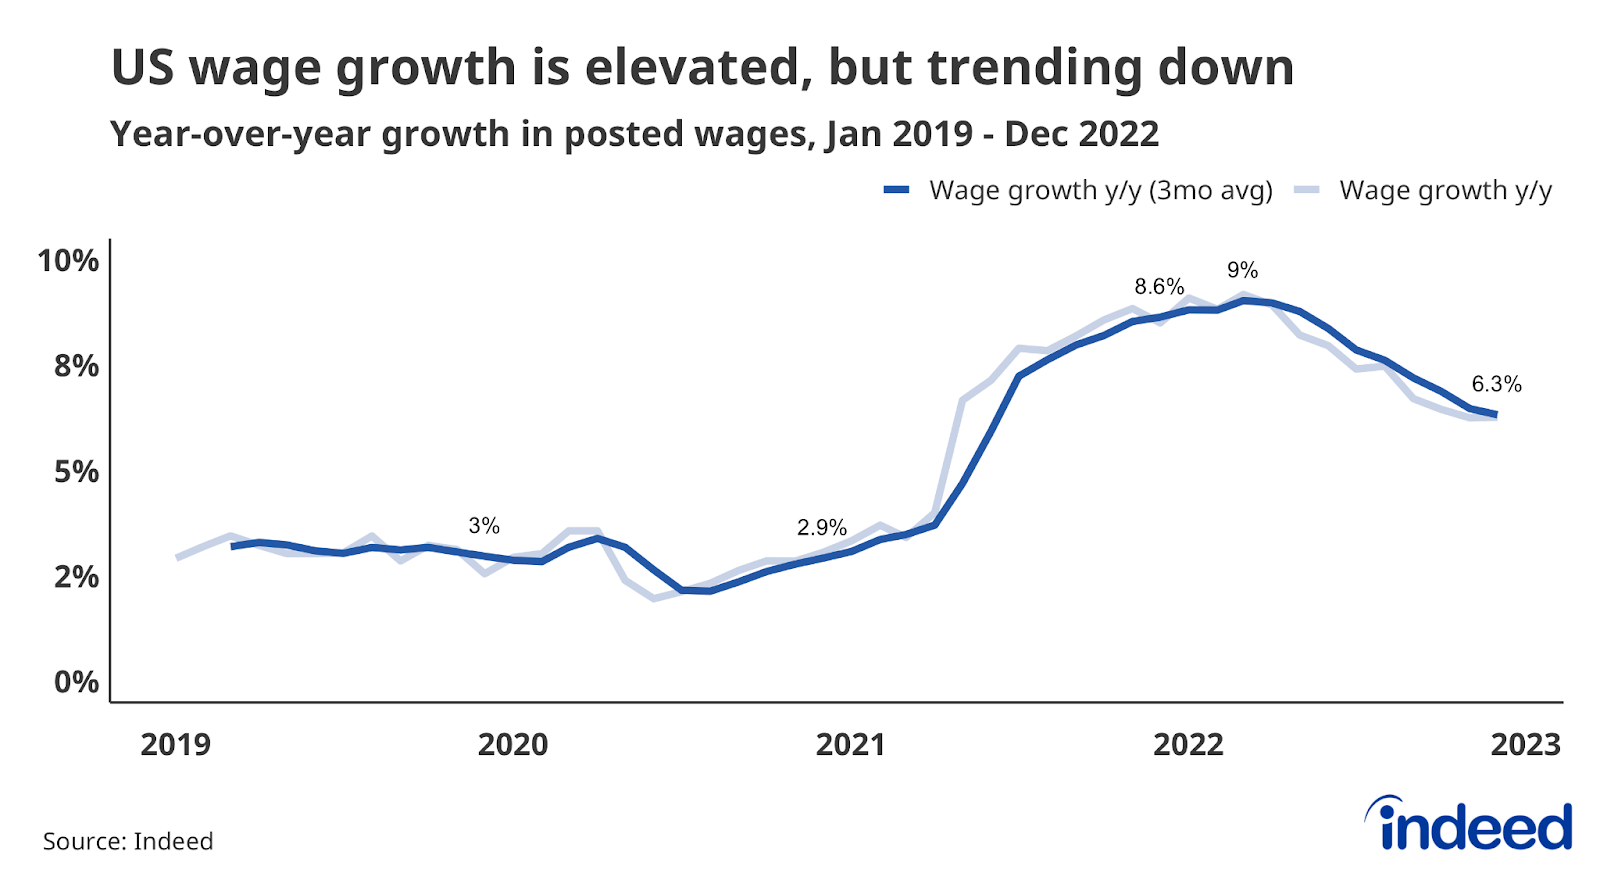 Line graph titled “US wage growth is elevated, but trending down” with a vertical axis from 0% to 10%. 